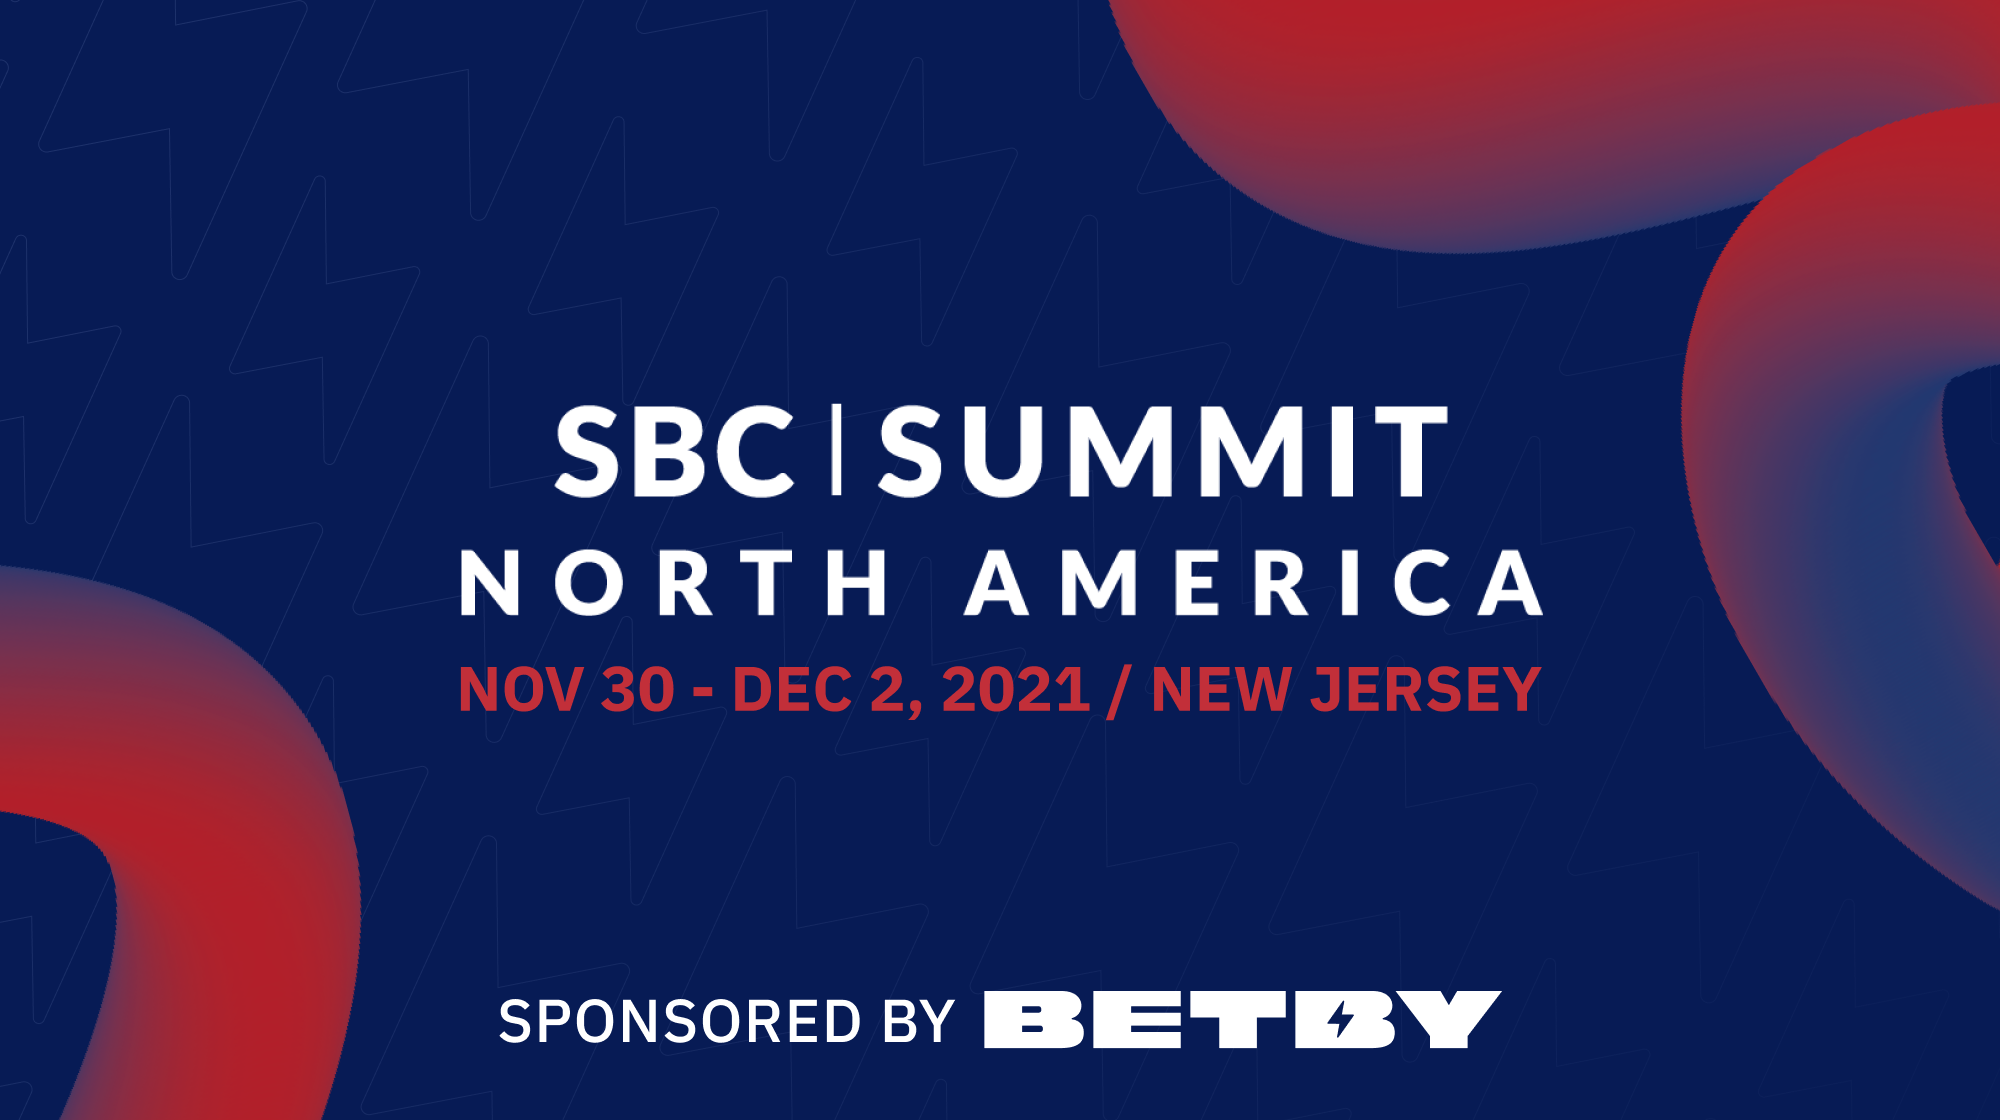 BETBY prepared for SBC North America Summit